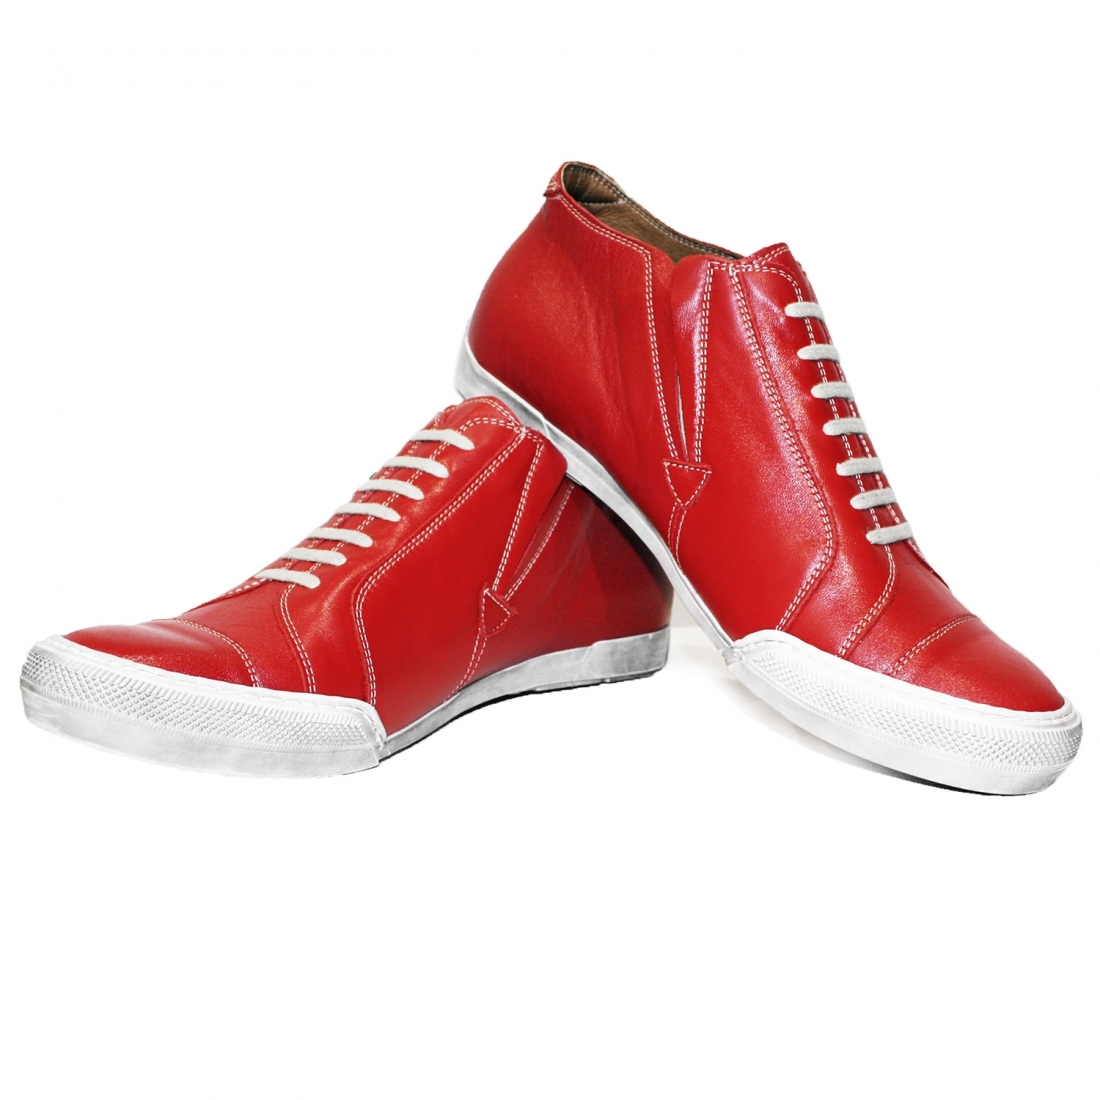 Modello Rednoise - Zapatos Casuales - Handmade Colorful Italian Leather Shoes